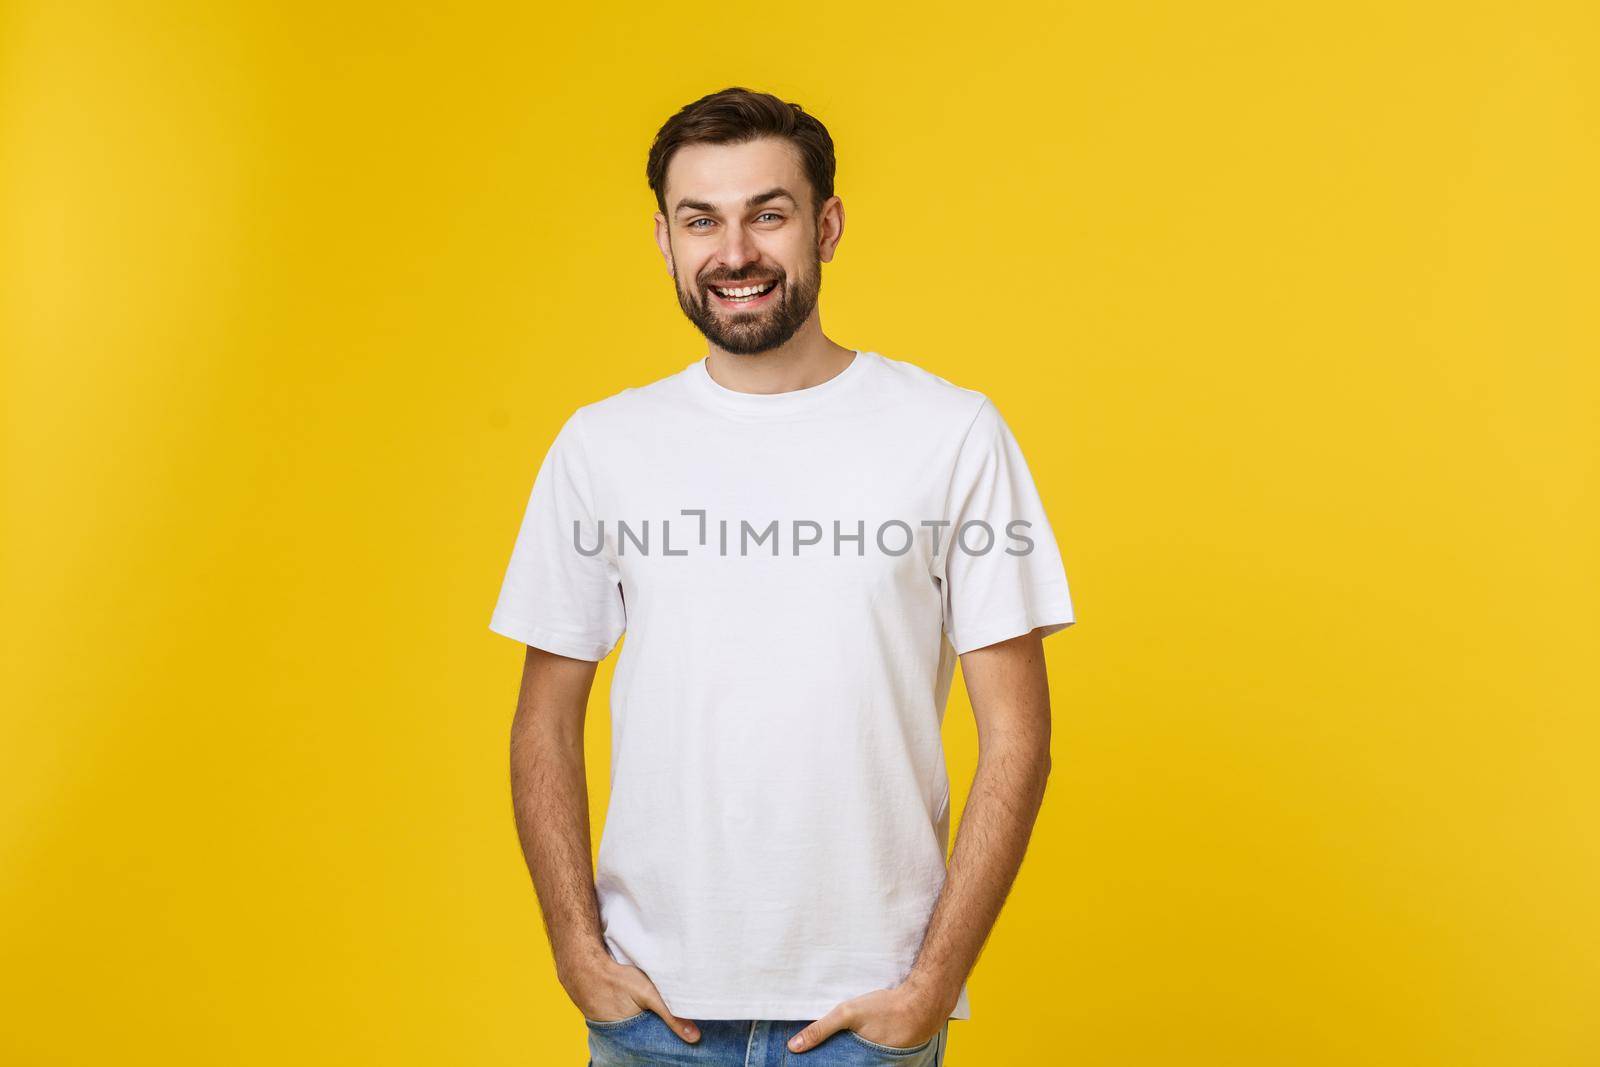 Portrait of a handsome young man smiling against yellow background.